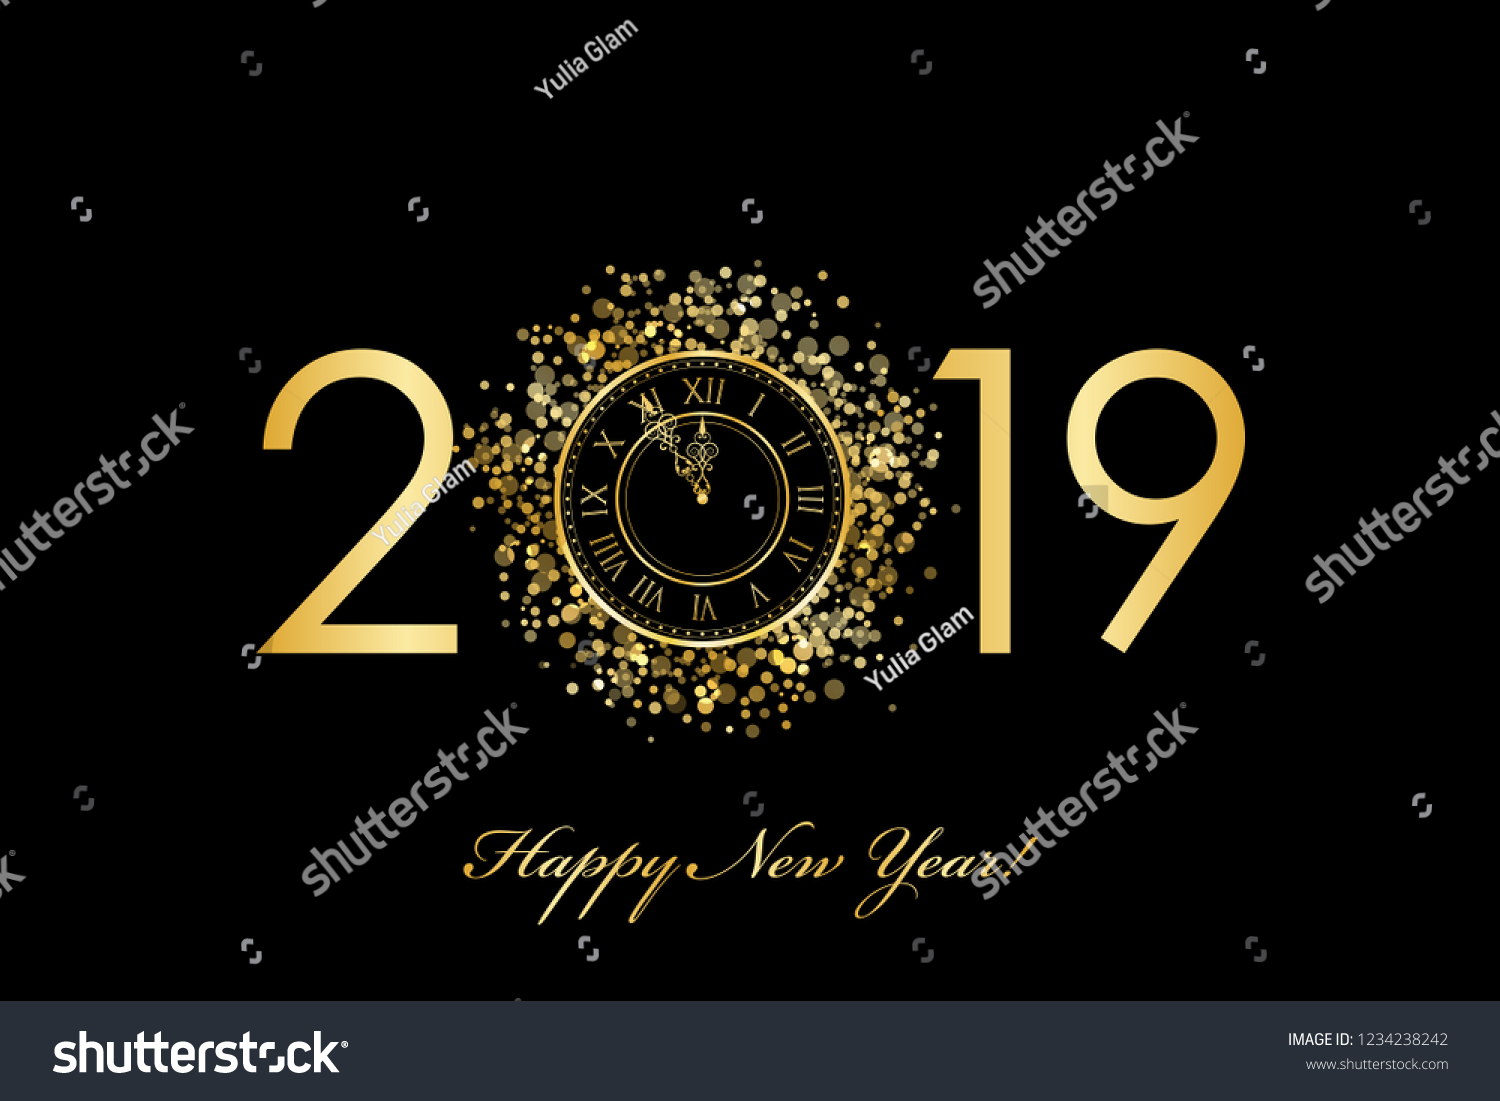 Vector 2019 Happy New Year background with gold clock on black #1234238242